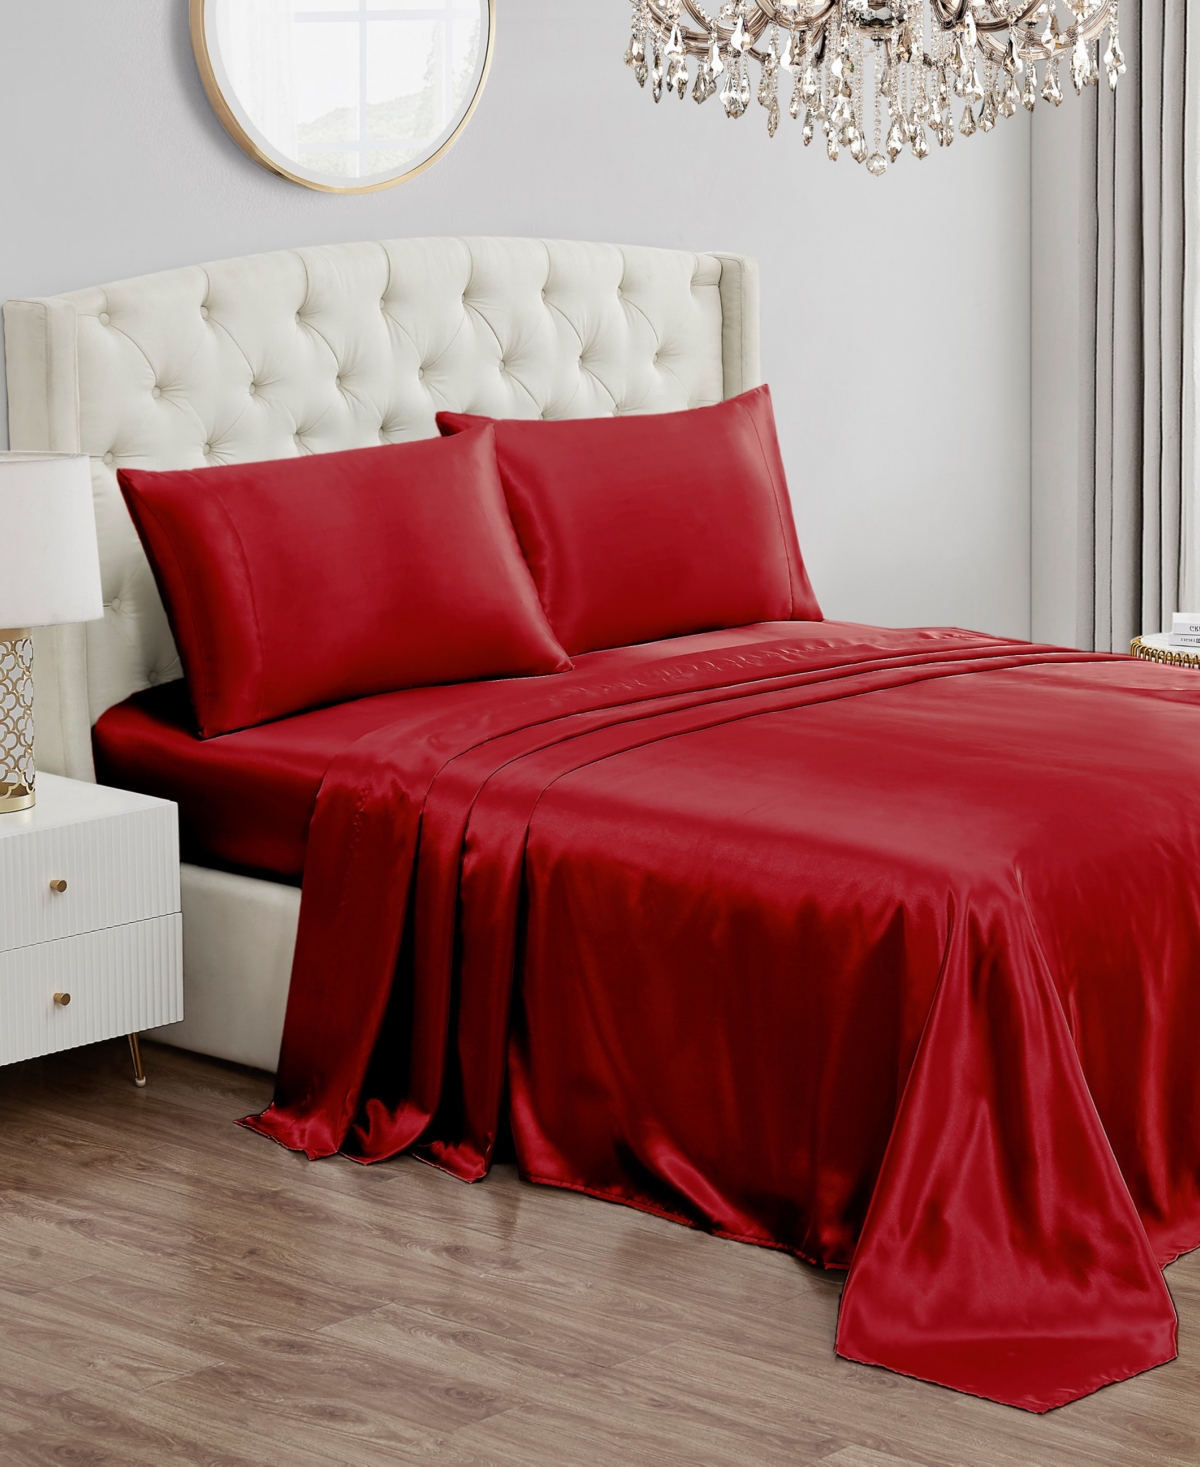 Juicy Couture Satin 4 Piece Sheet Set, King In Red